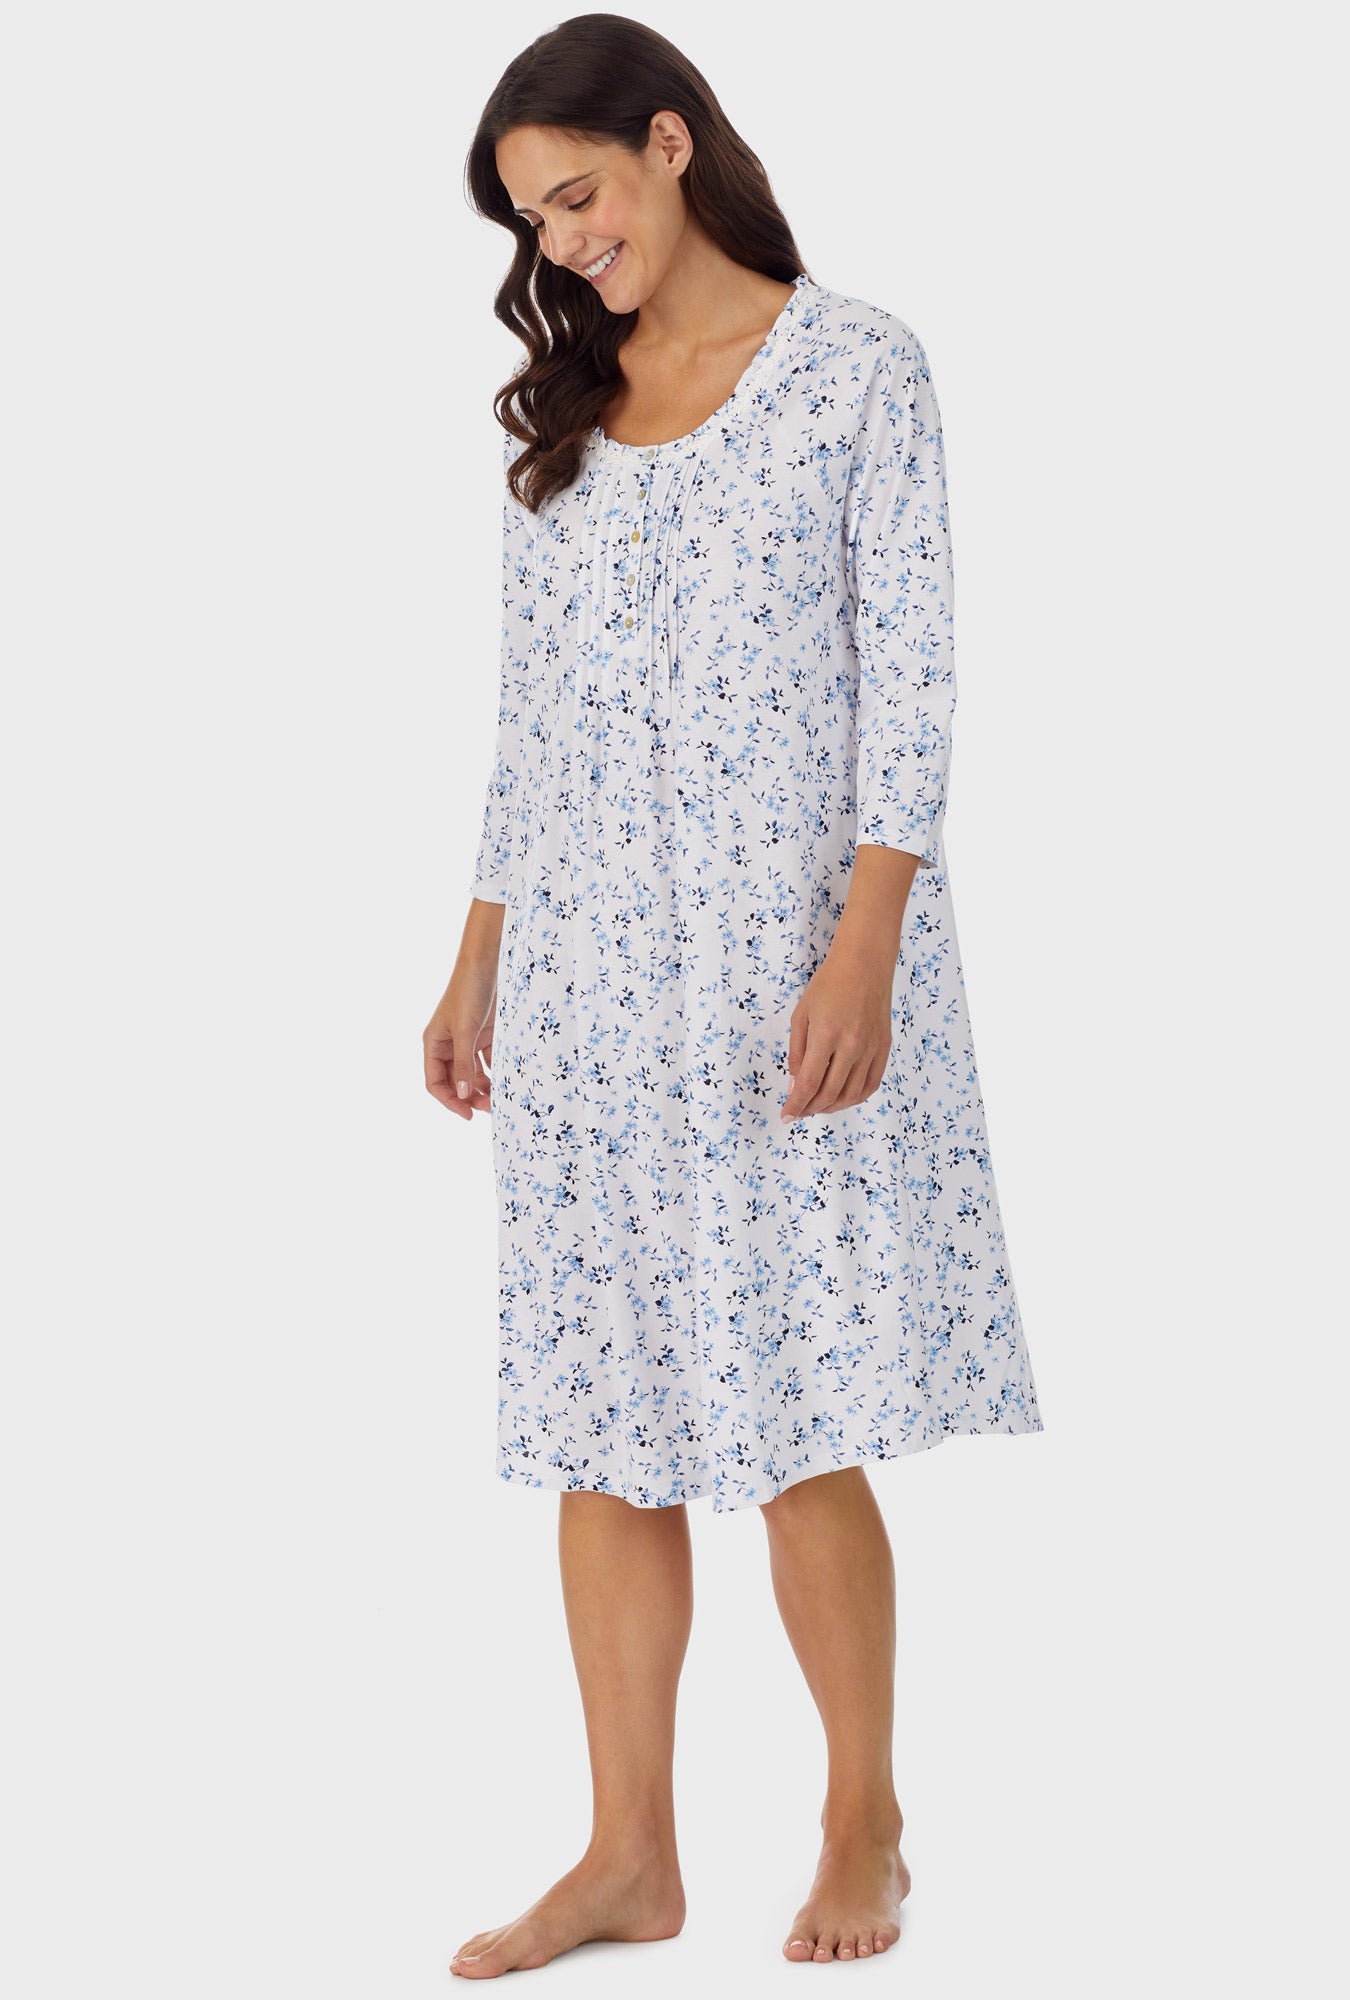 A lady wearing white cropped sleeve waltz nightgown.